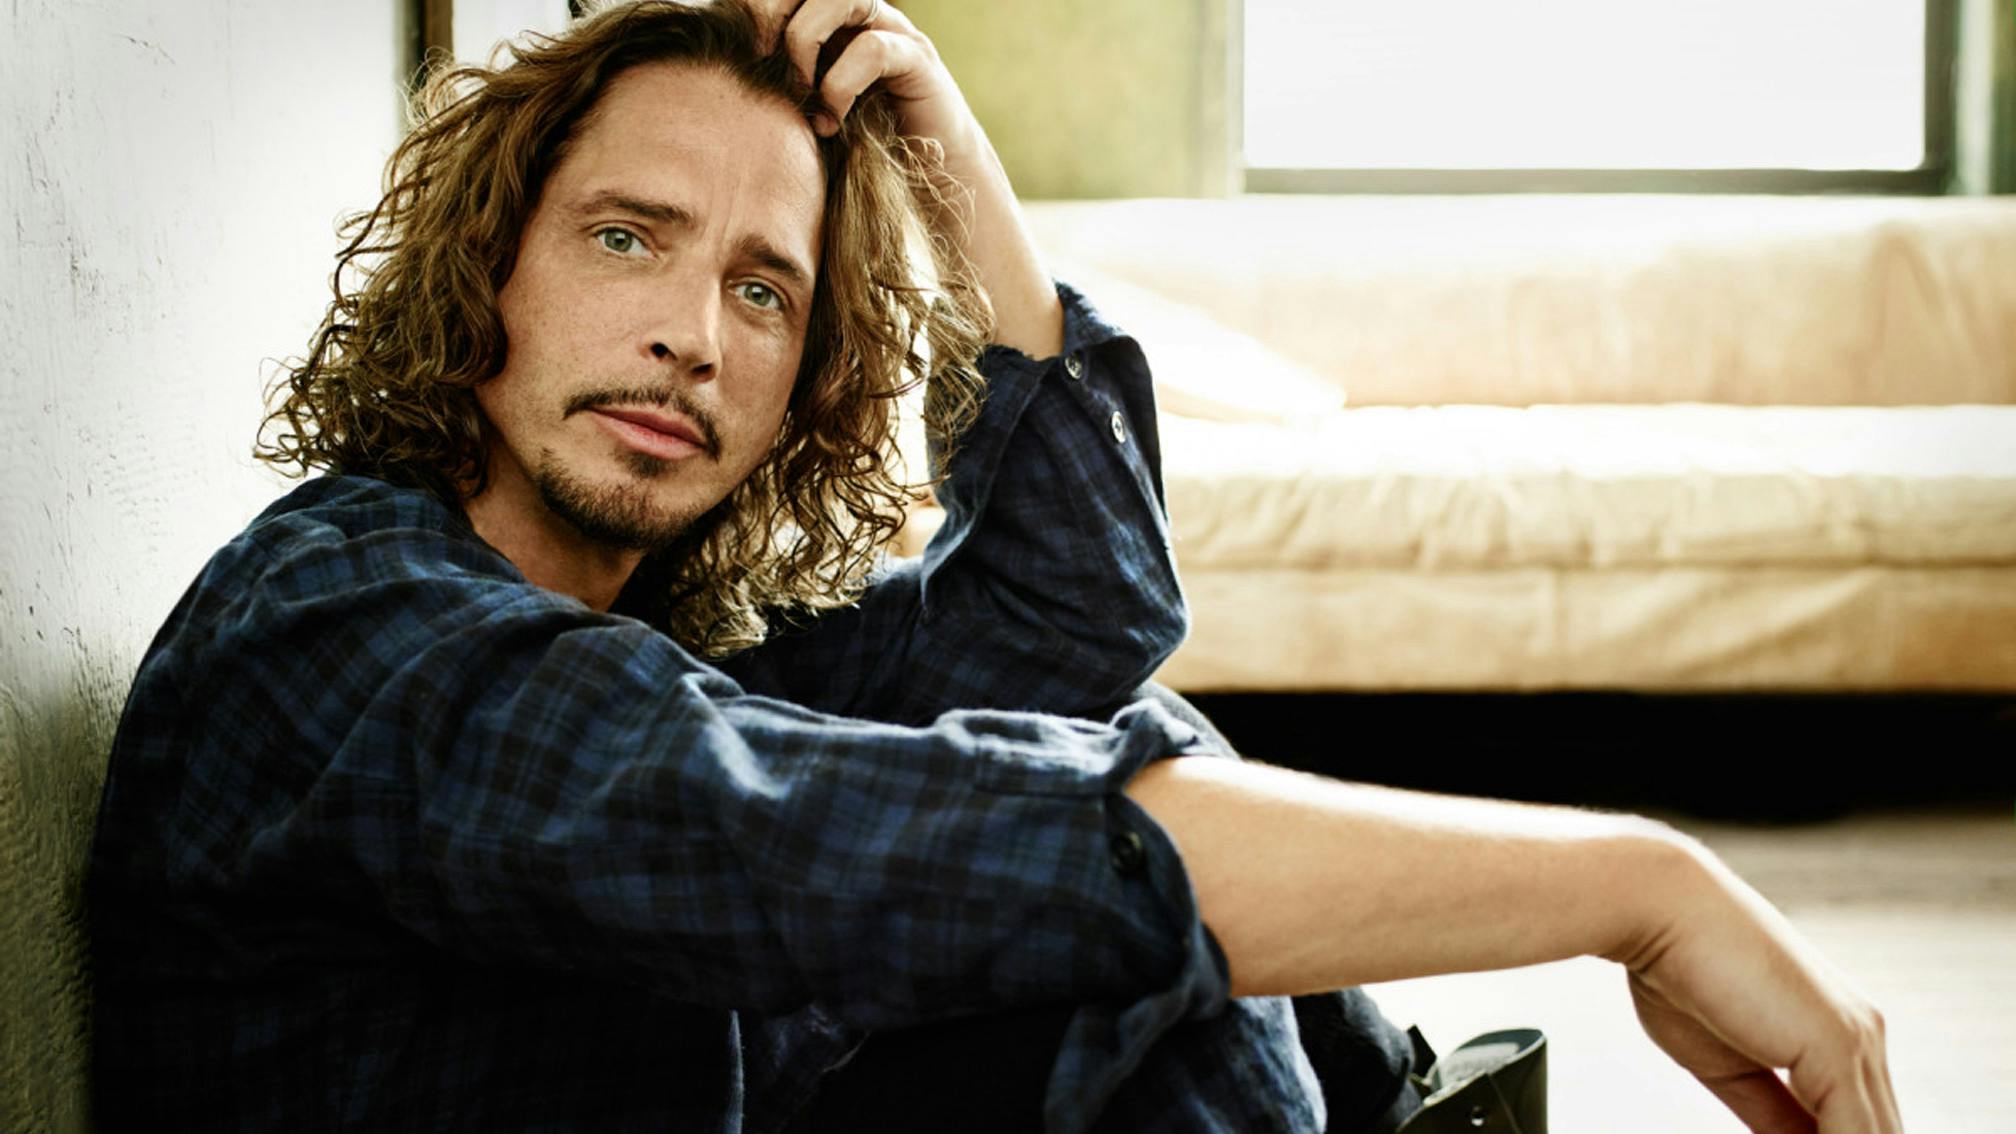 The New Chris Cornell Biopic Is “Not Sanctioned Or Approved” By His Estate